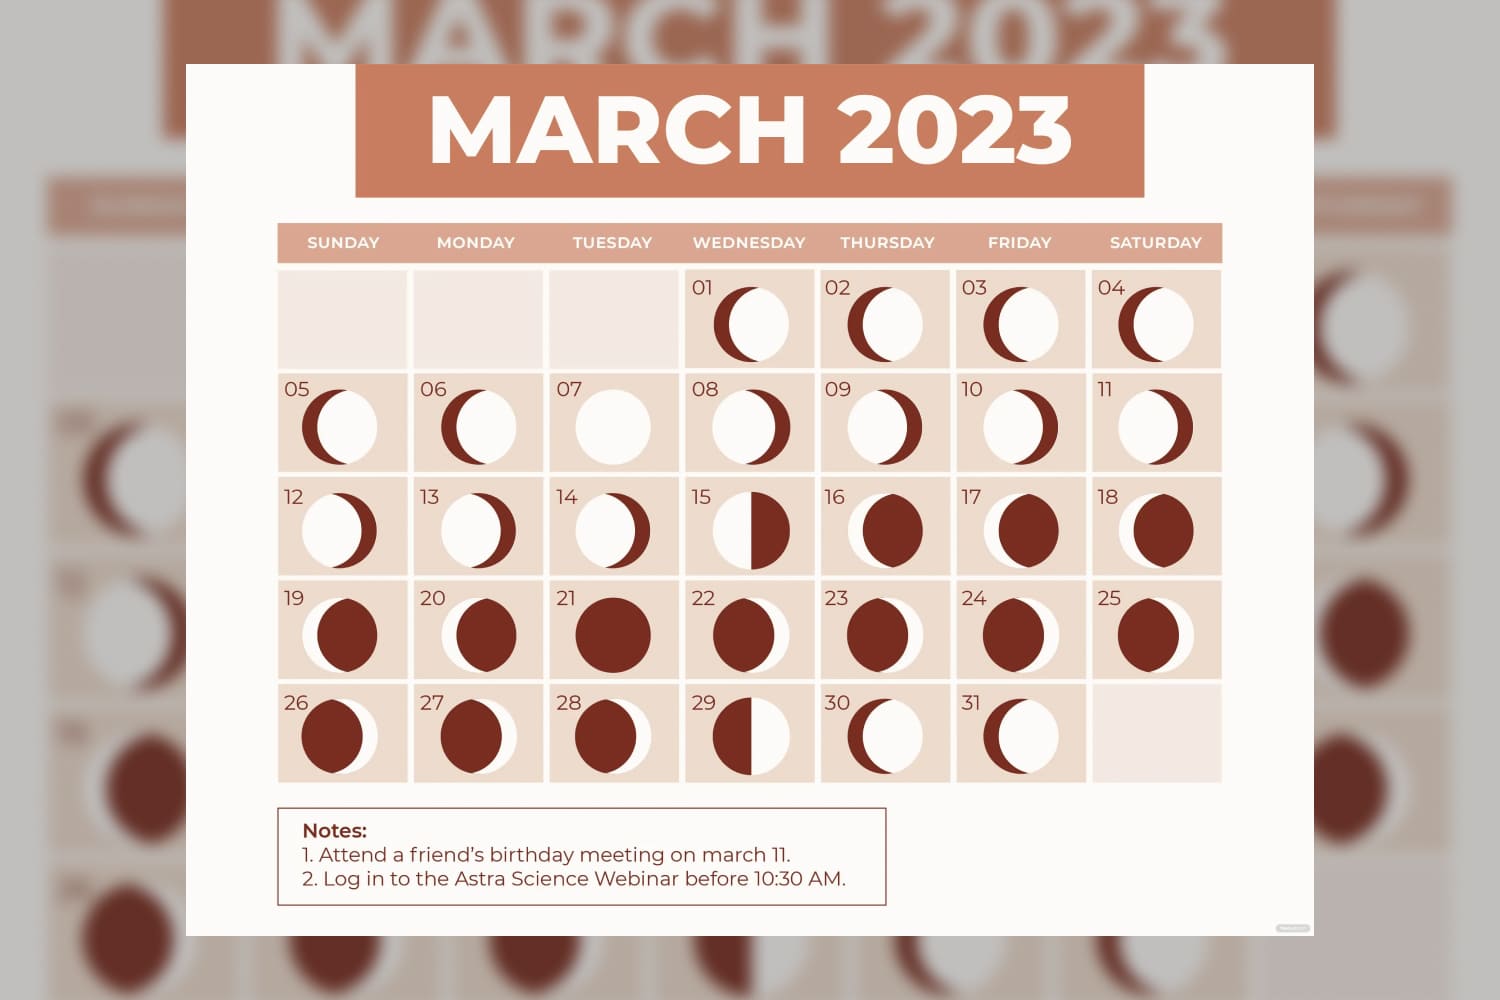 The Lunar Calendar March 2023 template with the moon's phases for each day of the month.